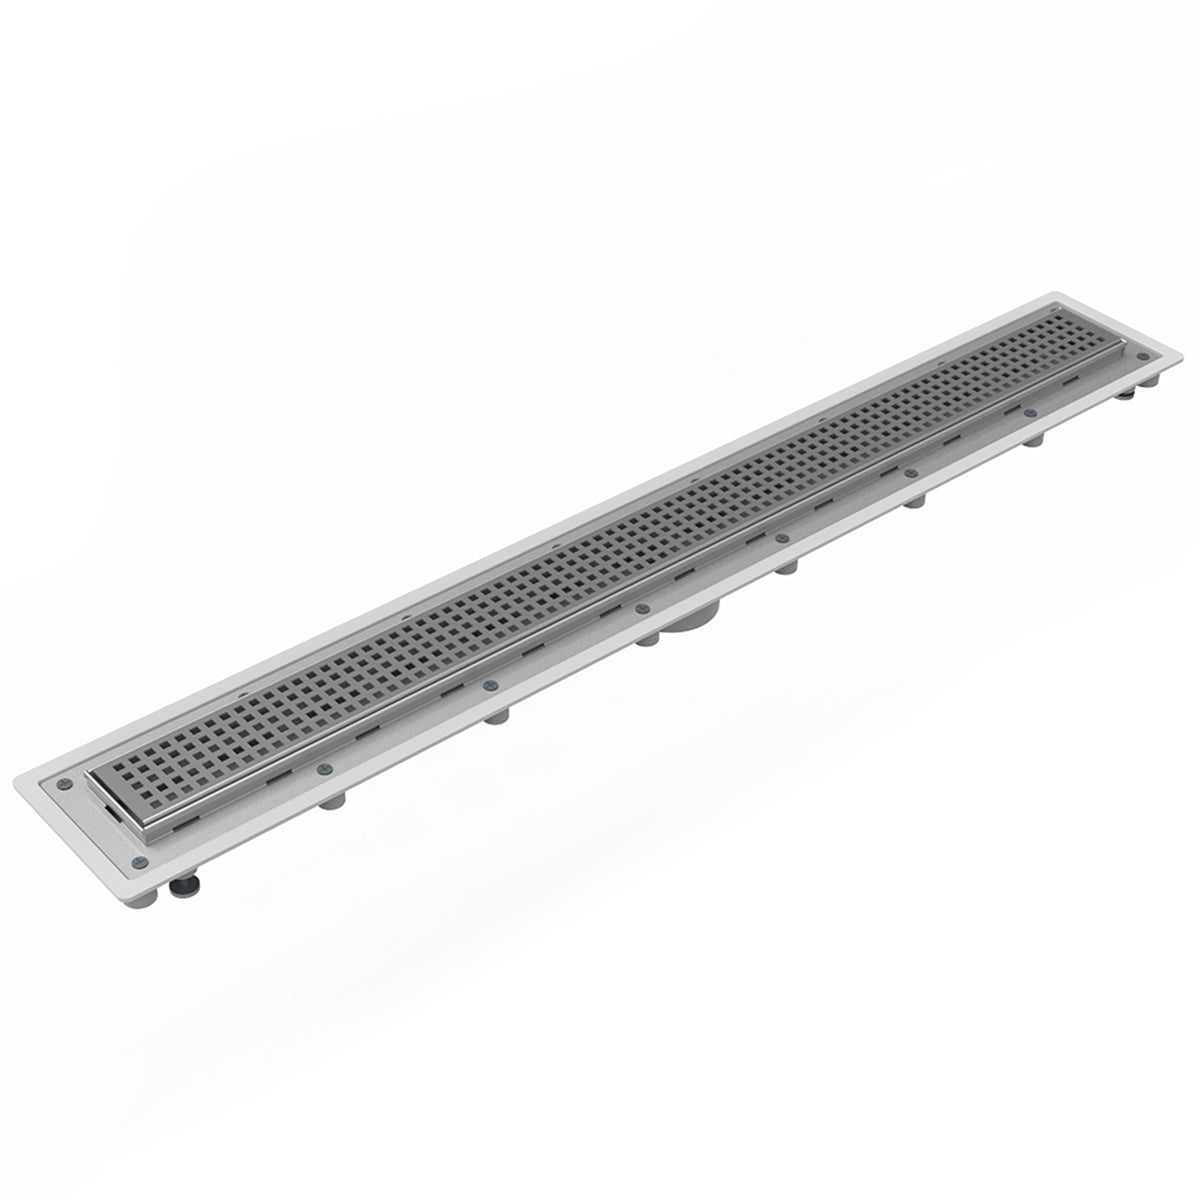 Infinity Drain 36" Universal Infinity Linear Drain Kit with PVC Channel and Squares Pattern Grate